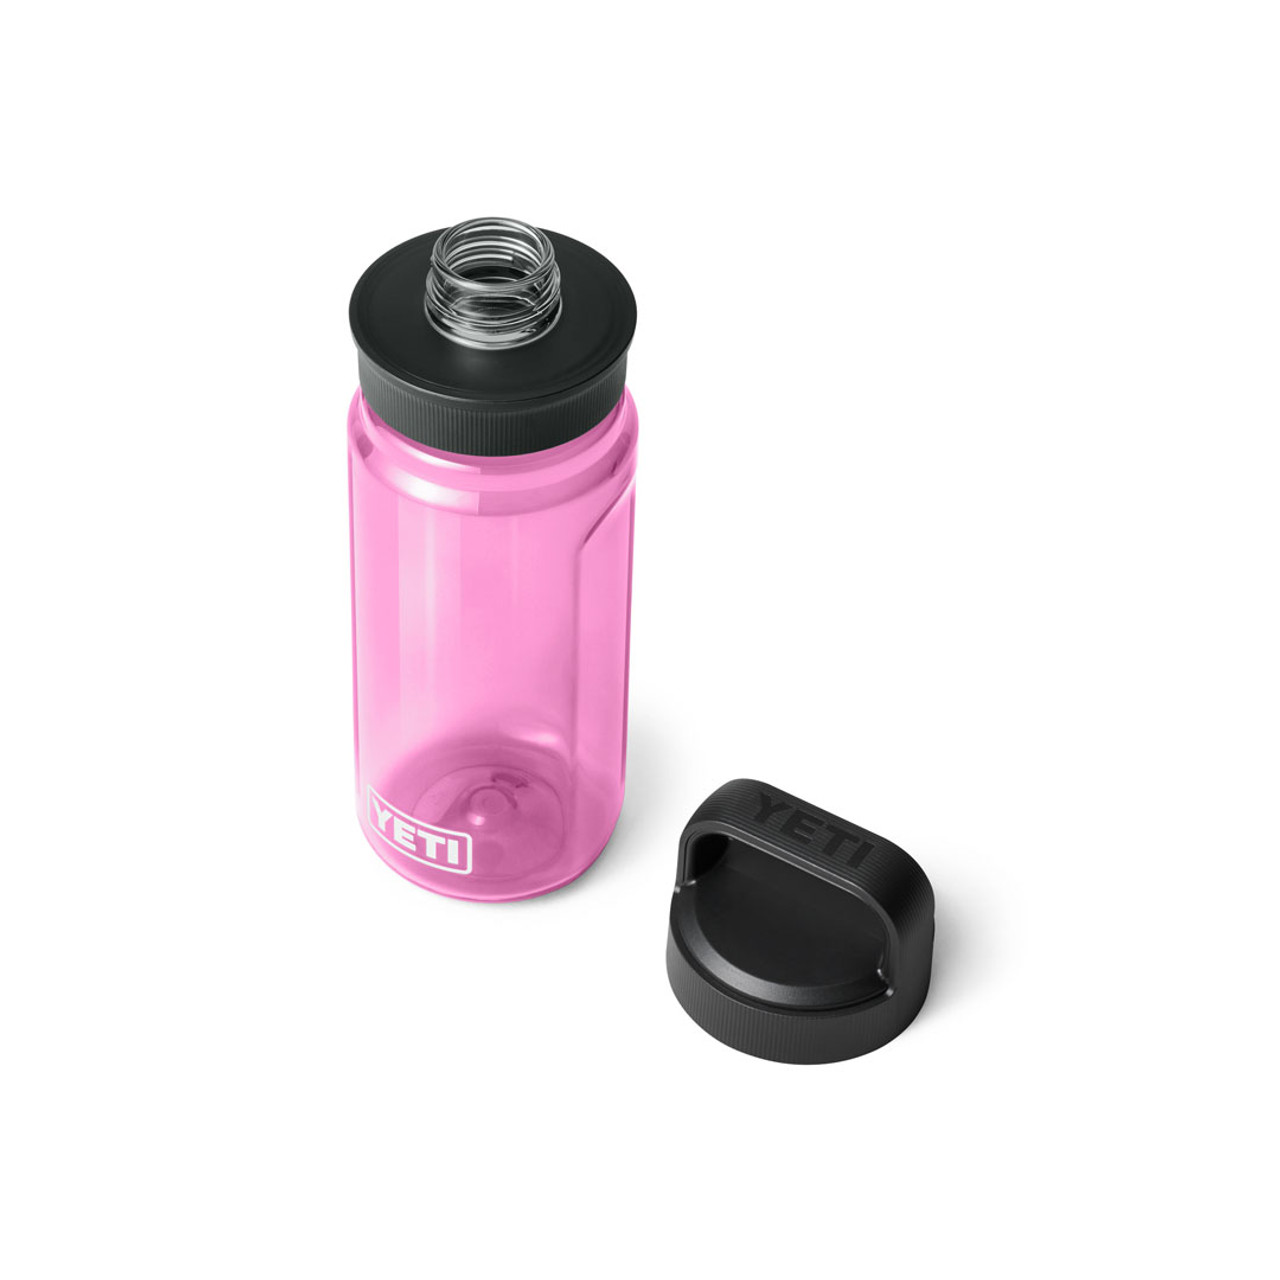 https://cdn11.bigcommerce.com/s-ppsyskcavg/images/stencil/1280x1280/products/68673/248124/YETI_Wholesale_Drinkware_Yonder_600m_Power_Pink_3qtr_Lid_Off_12780_B_2400x2400__43140.1694634791.jpg?c=2?imbypass=on